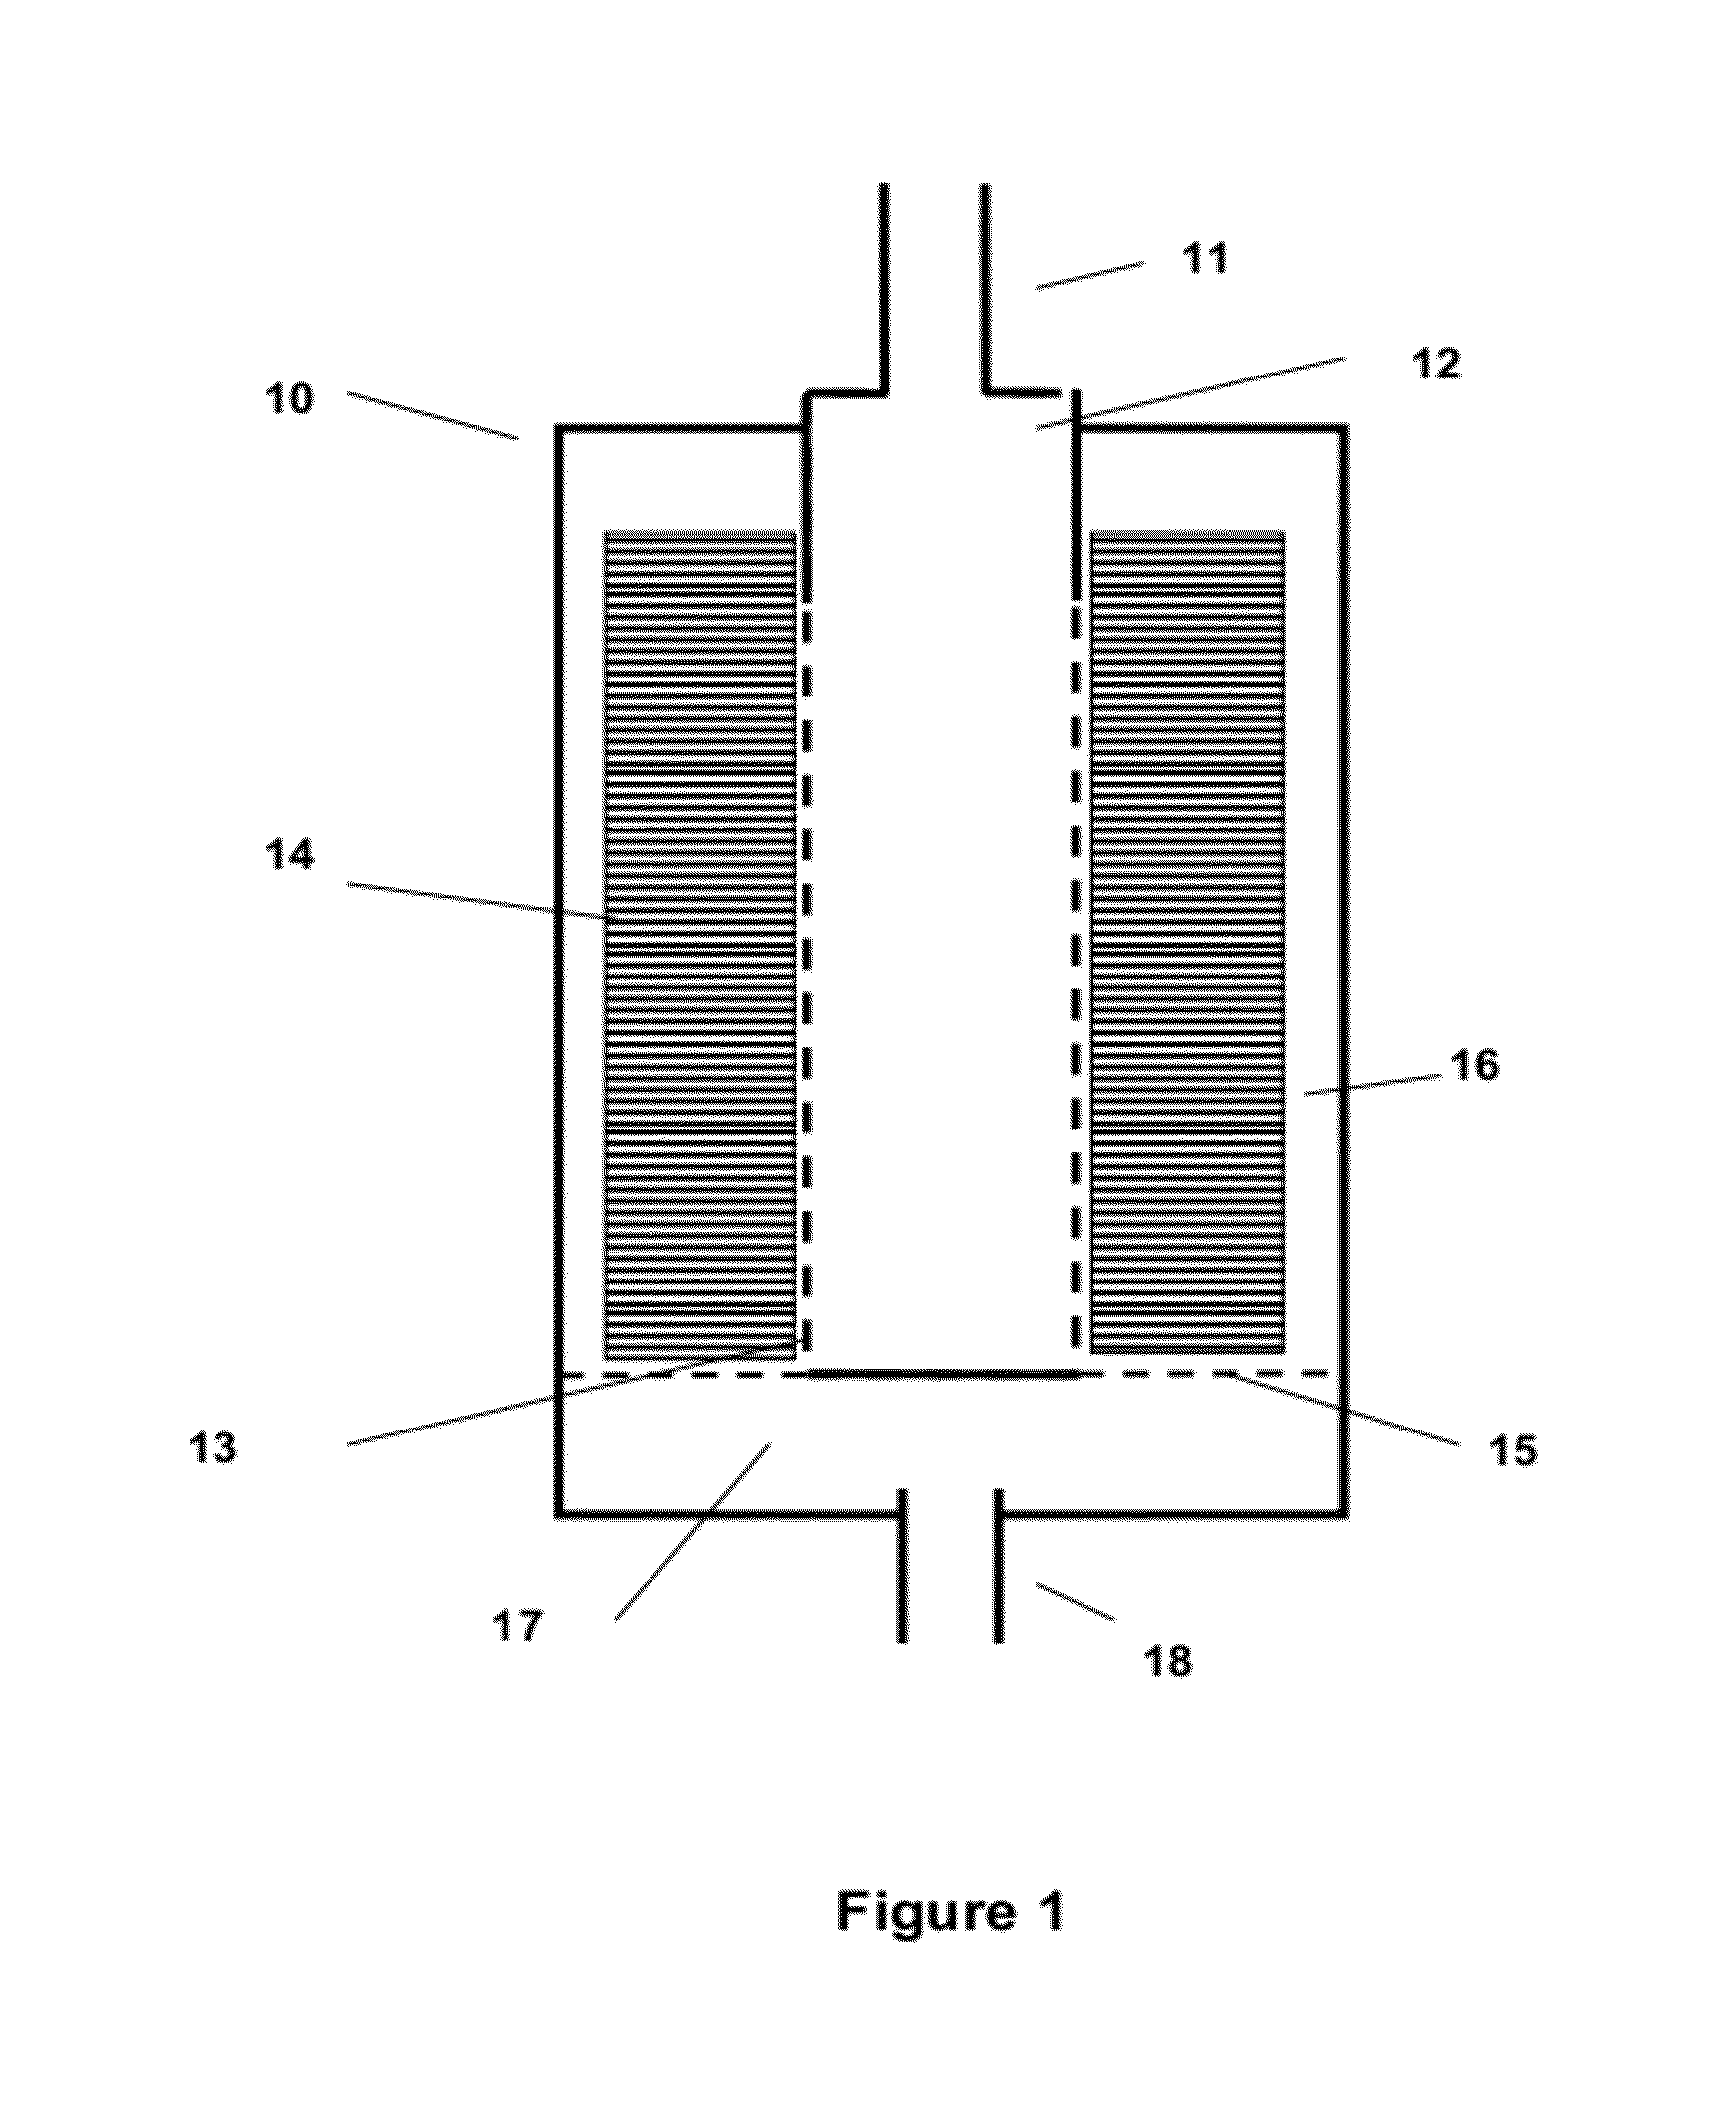 Gas Purification Process Utilizing Engineered Small Particle Adsorbents